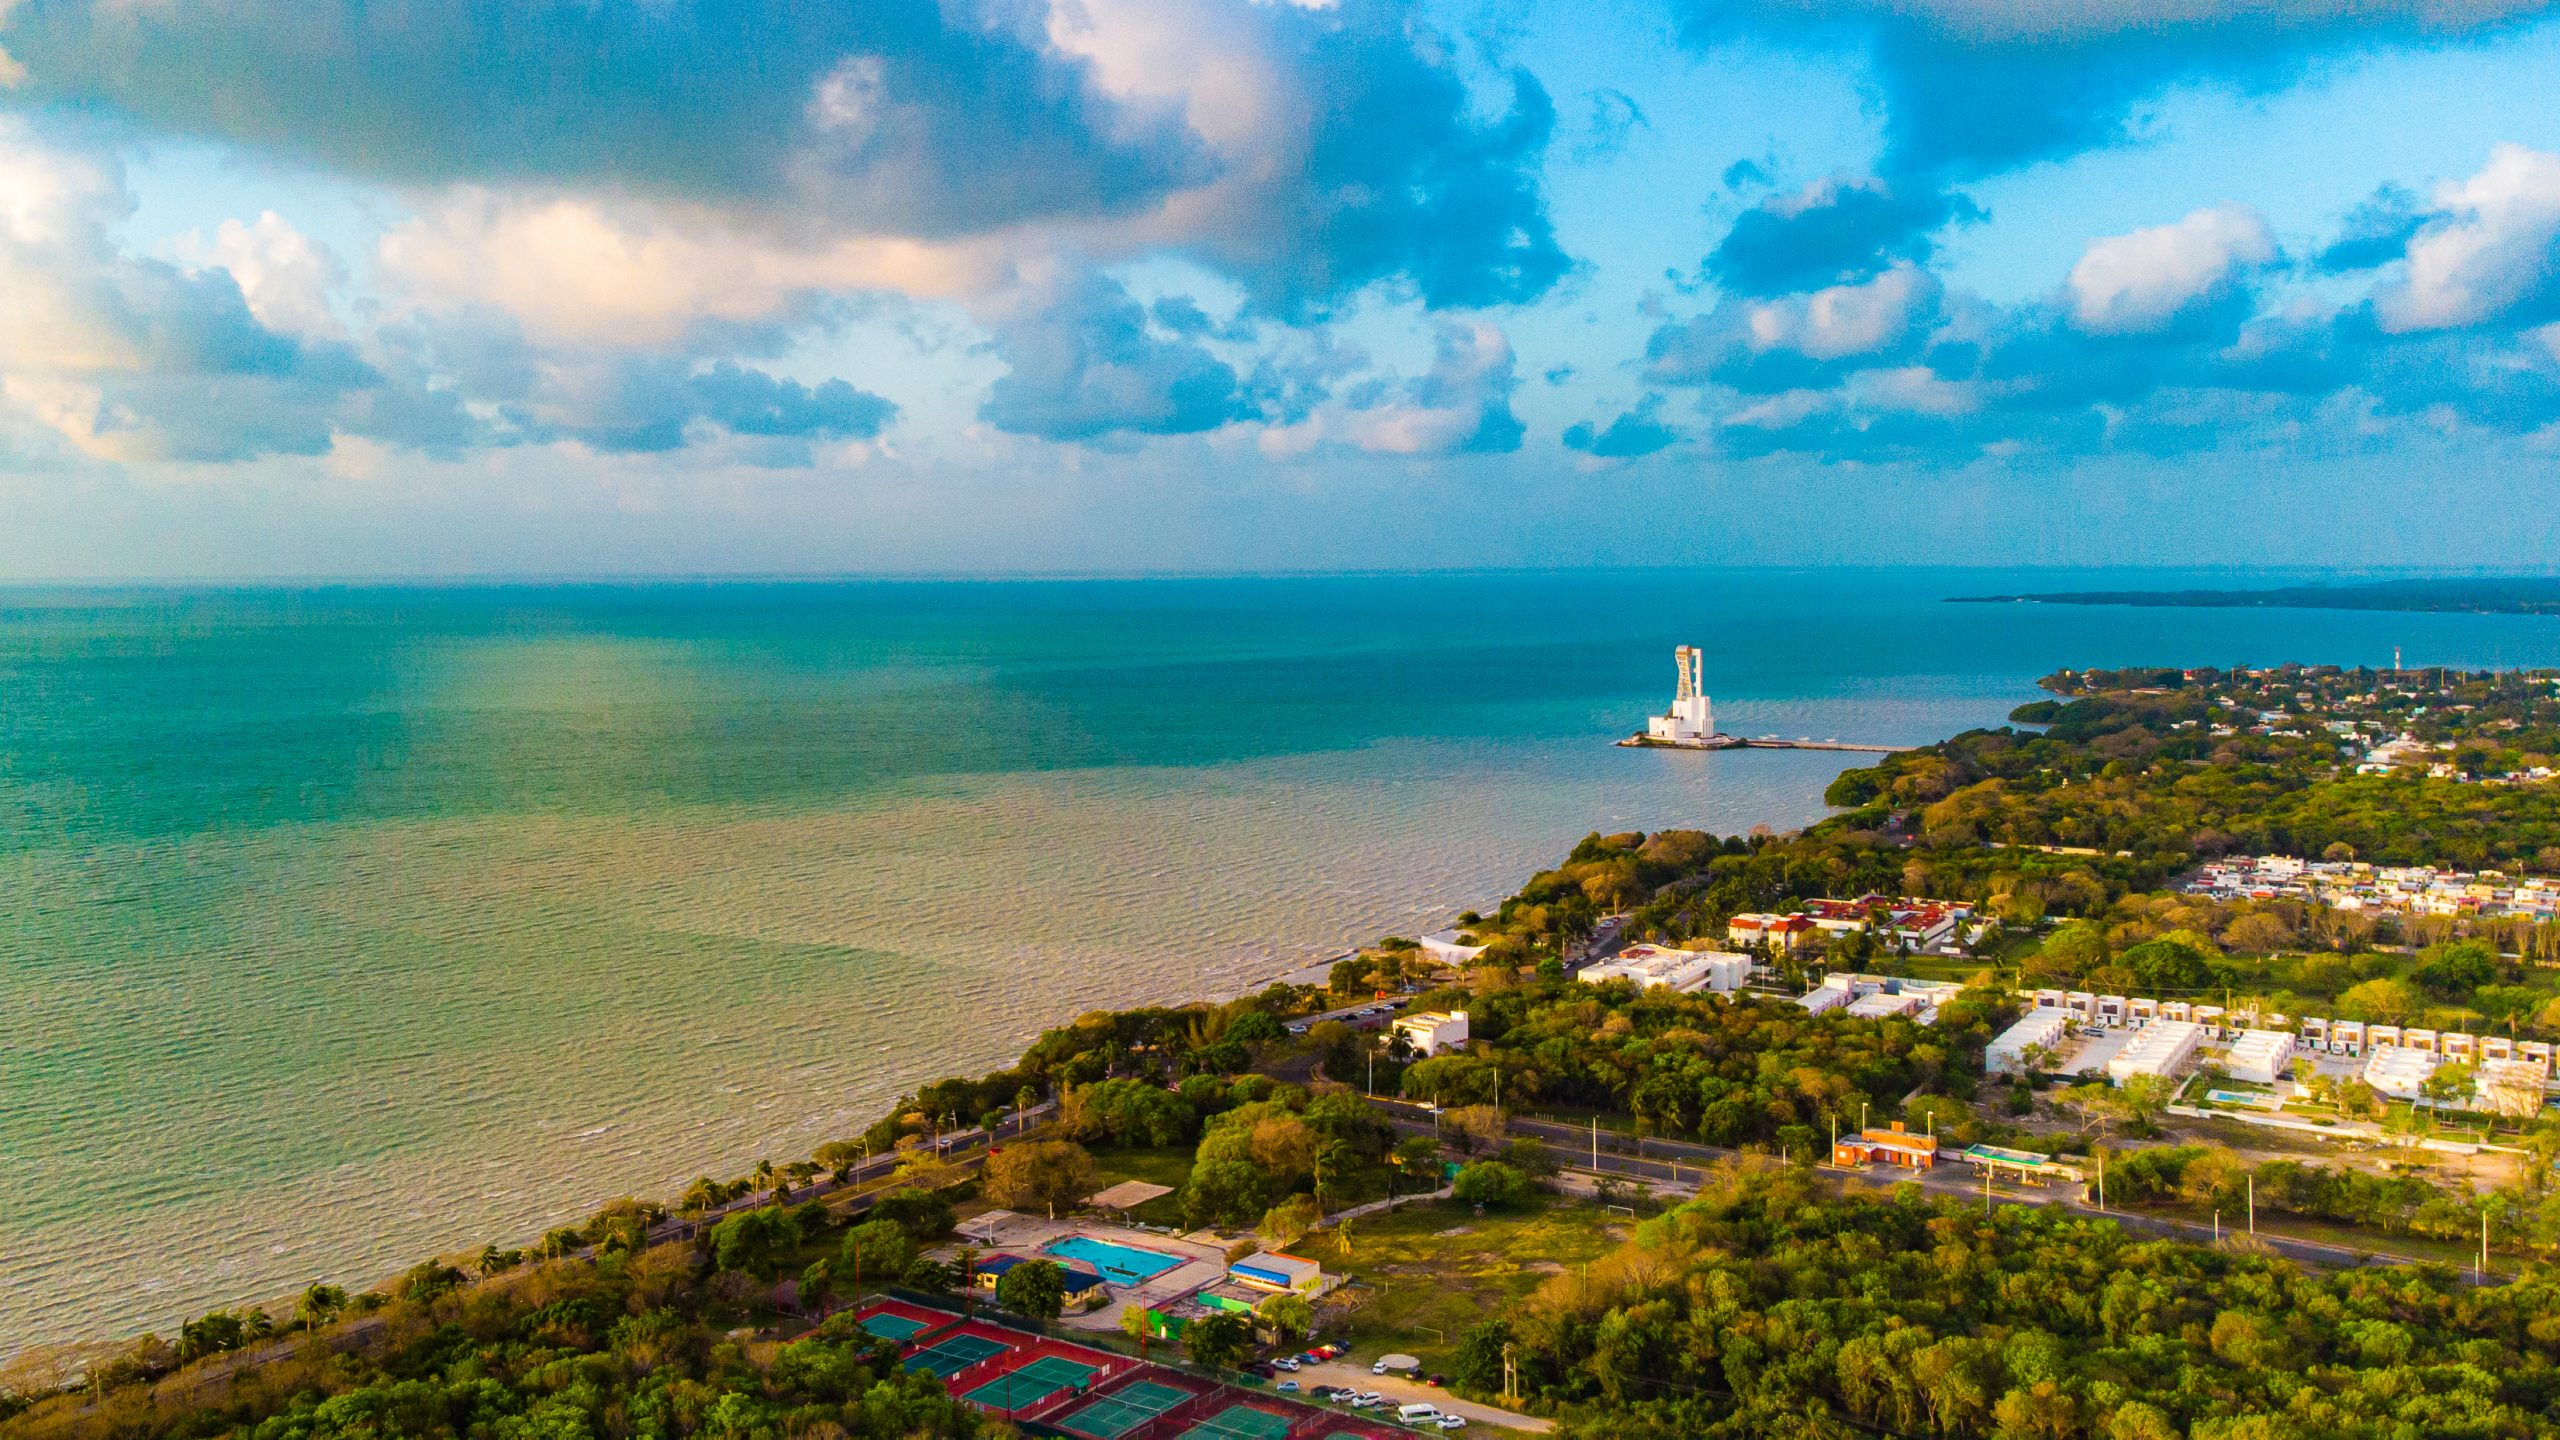 Uncover the secrets of the Ancient Mayan World with a visit to Chetumal, Mexico